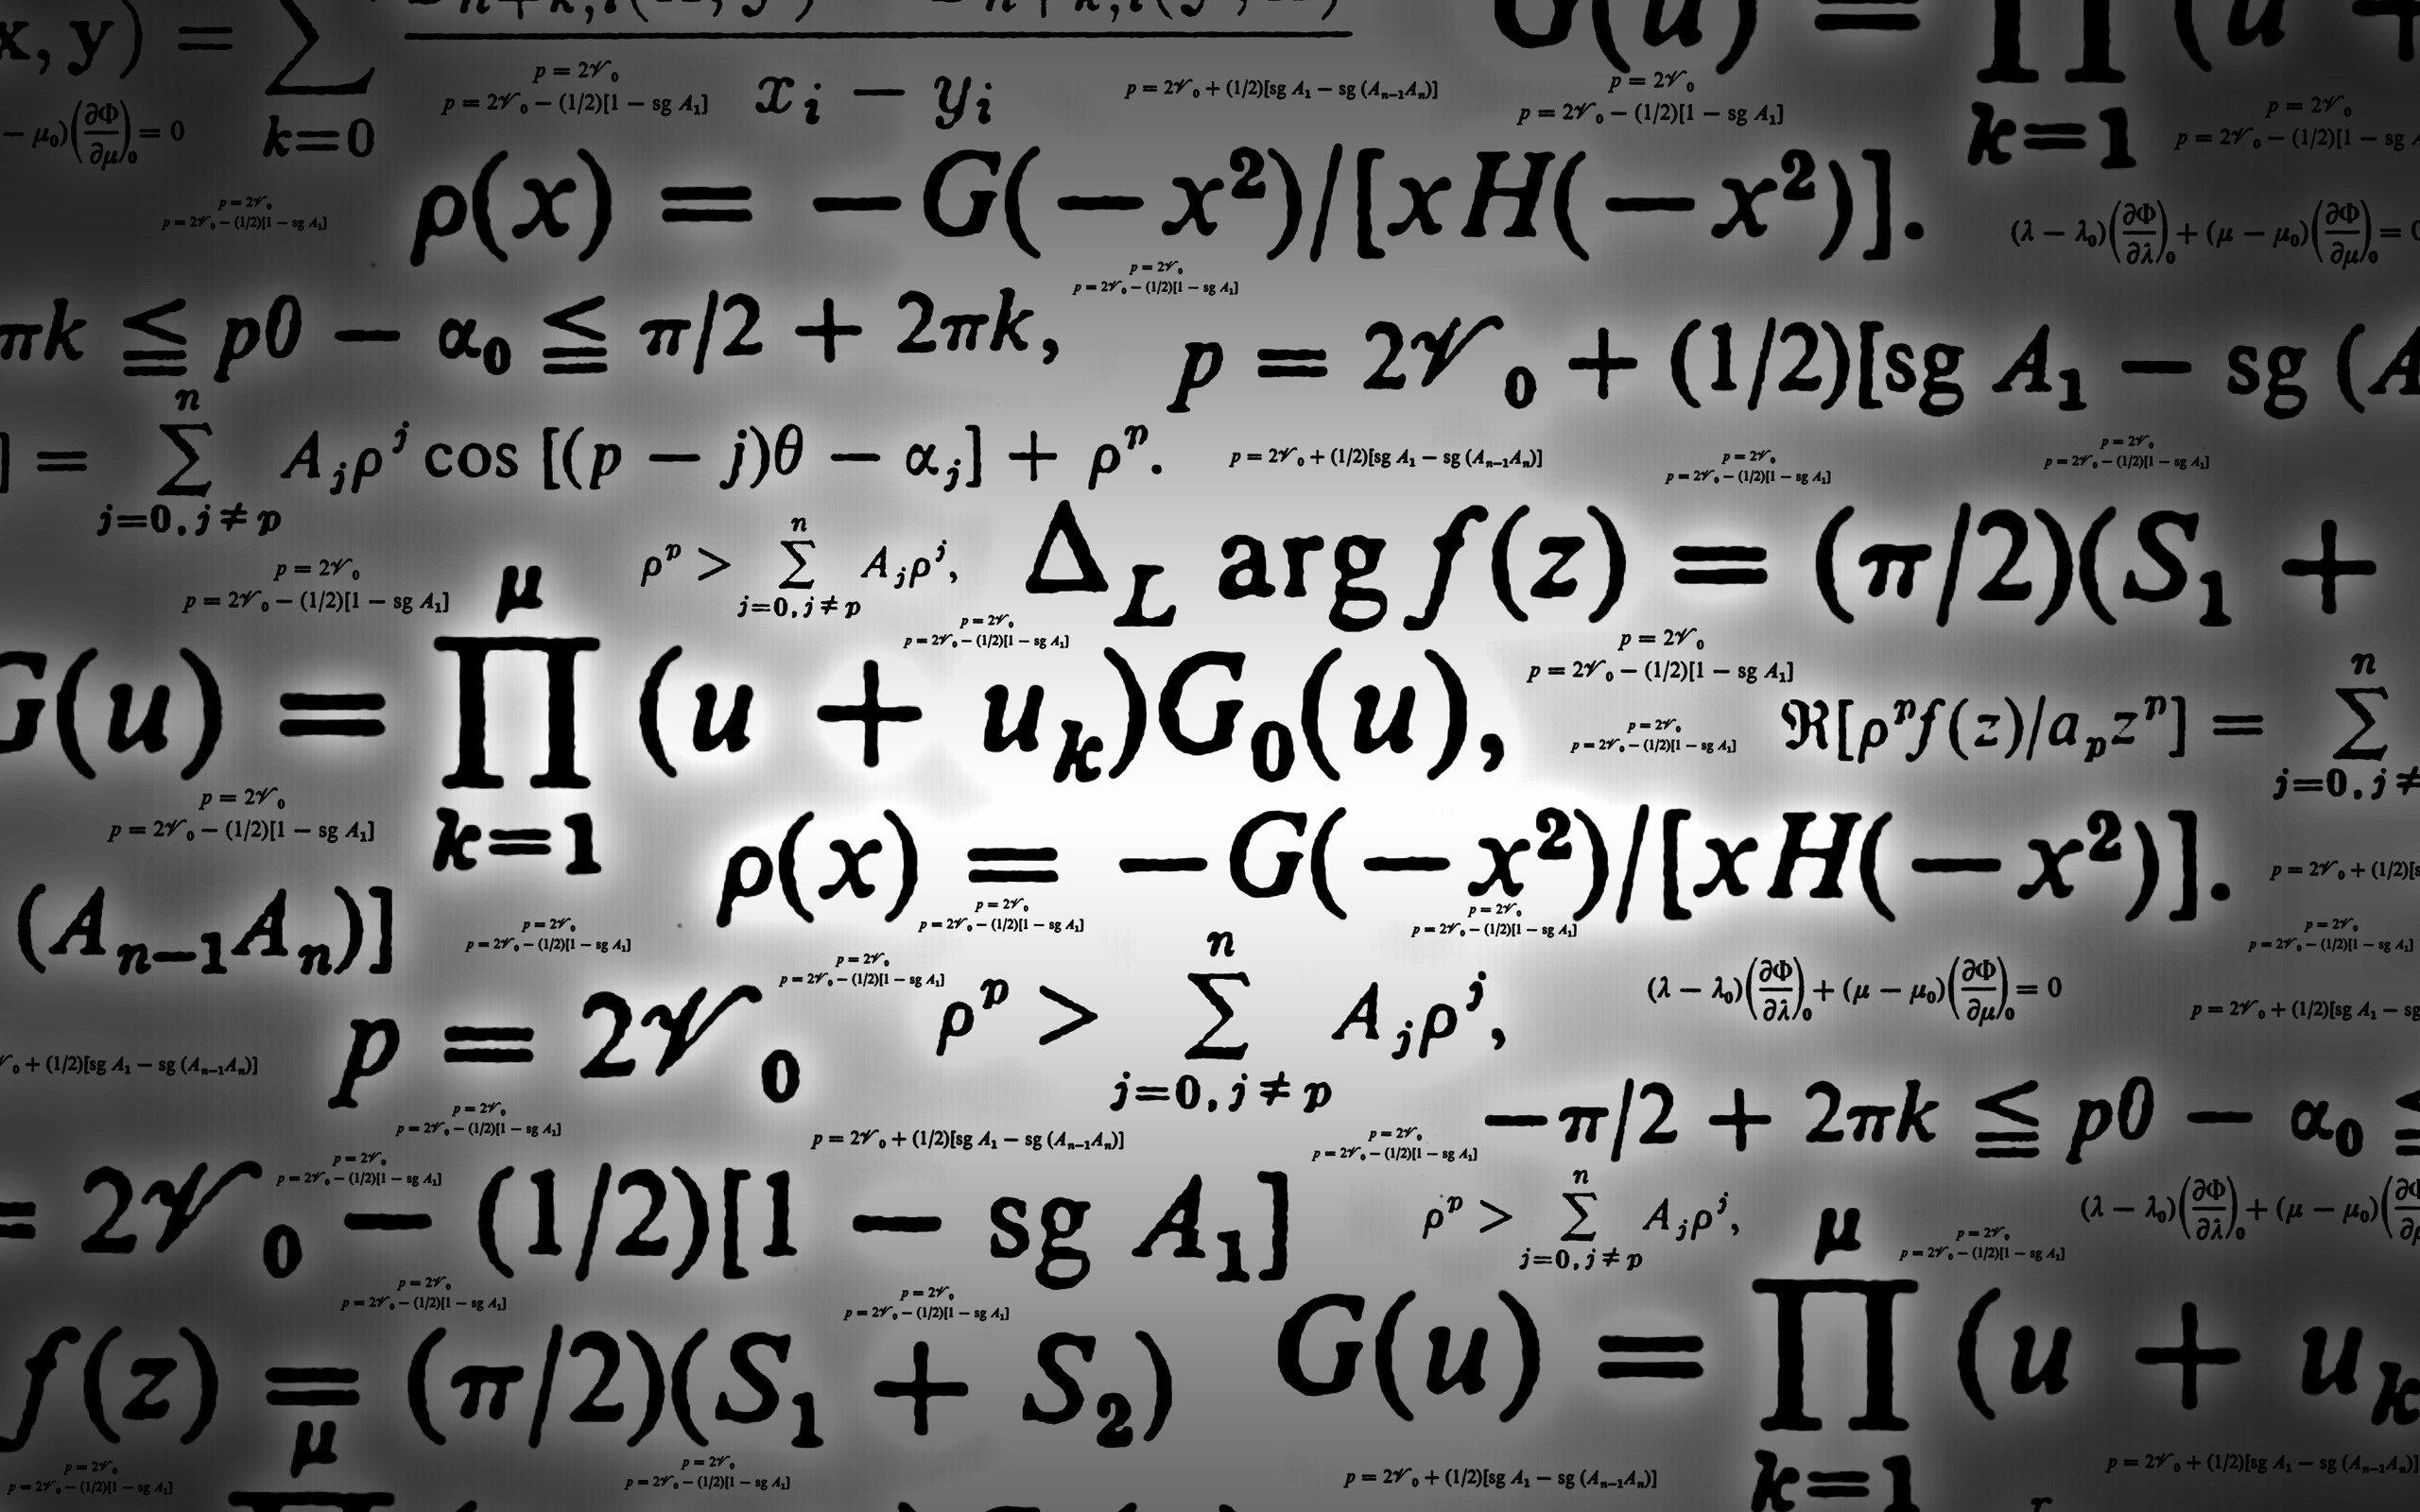 Math Equations Wallpapers